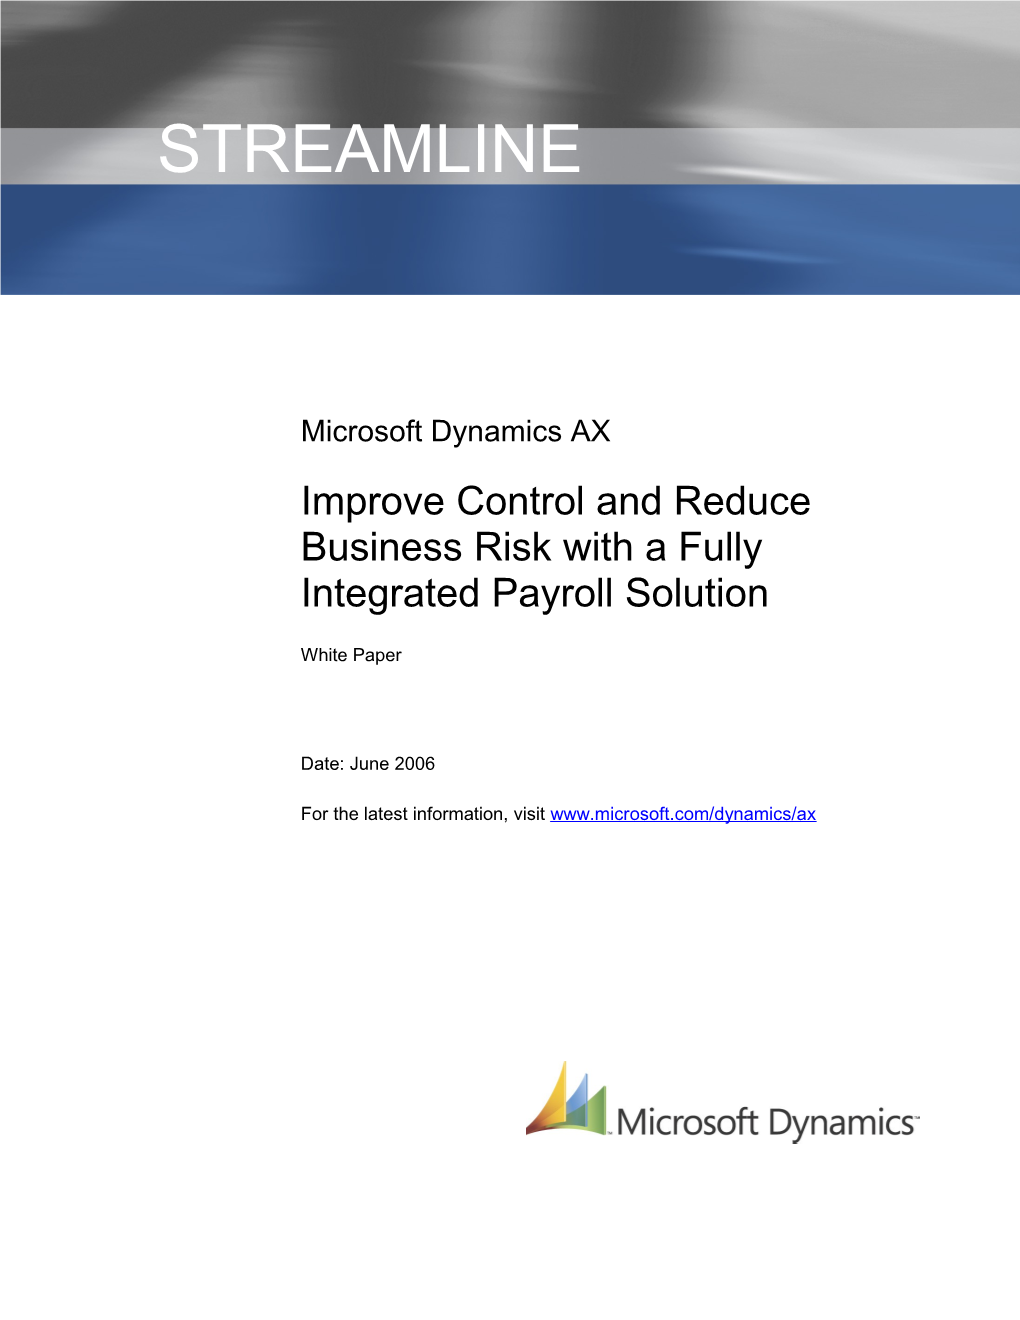 Improve Control and Reduce Business Risk with a Fully Integrated Payroll Solution